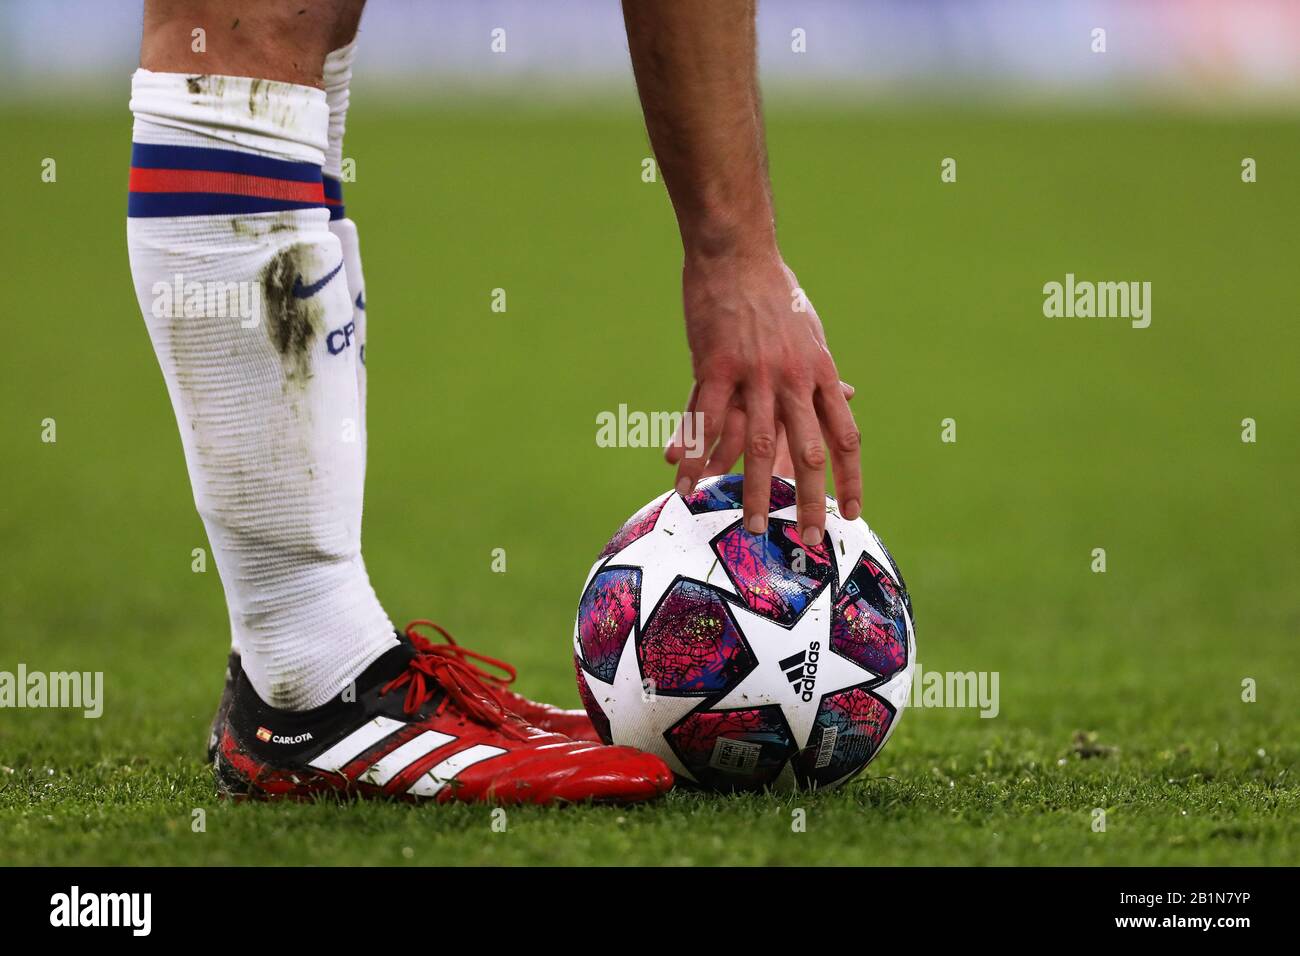 Istanbul 20 Official Adidas match ball is placed by Cesar Azpilicueta of Chelsea - Chelsea v Bayern Munich, UEFA Champions League - Round of 16 First Leg, Stamford Bridge, London, UK - 25th February 2020 Stock Photo